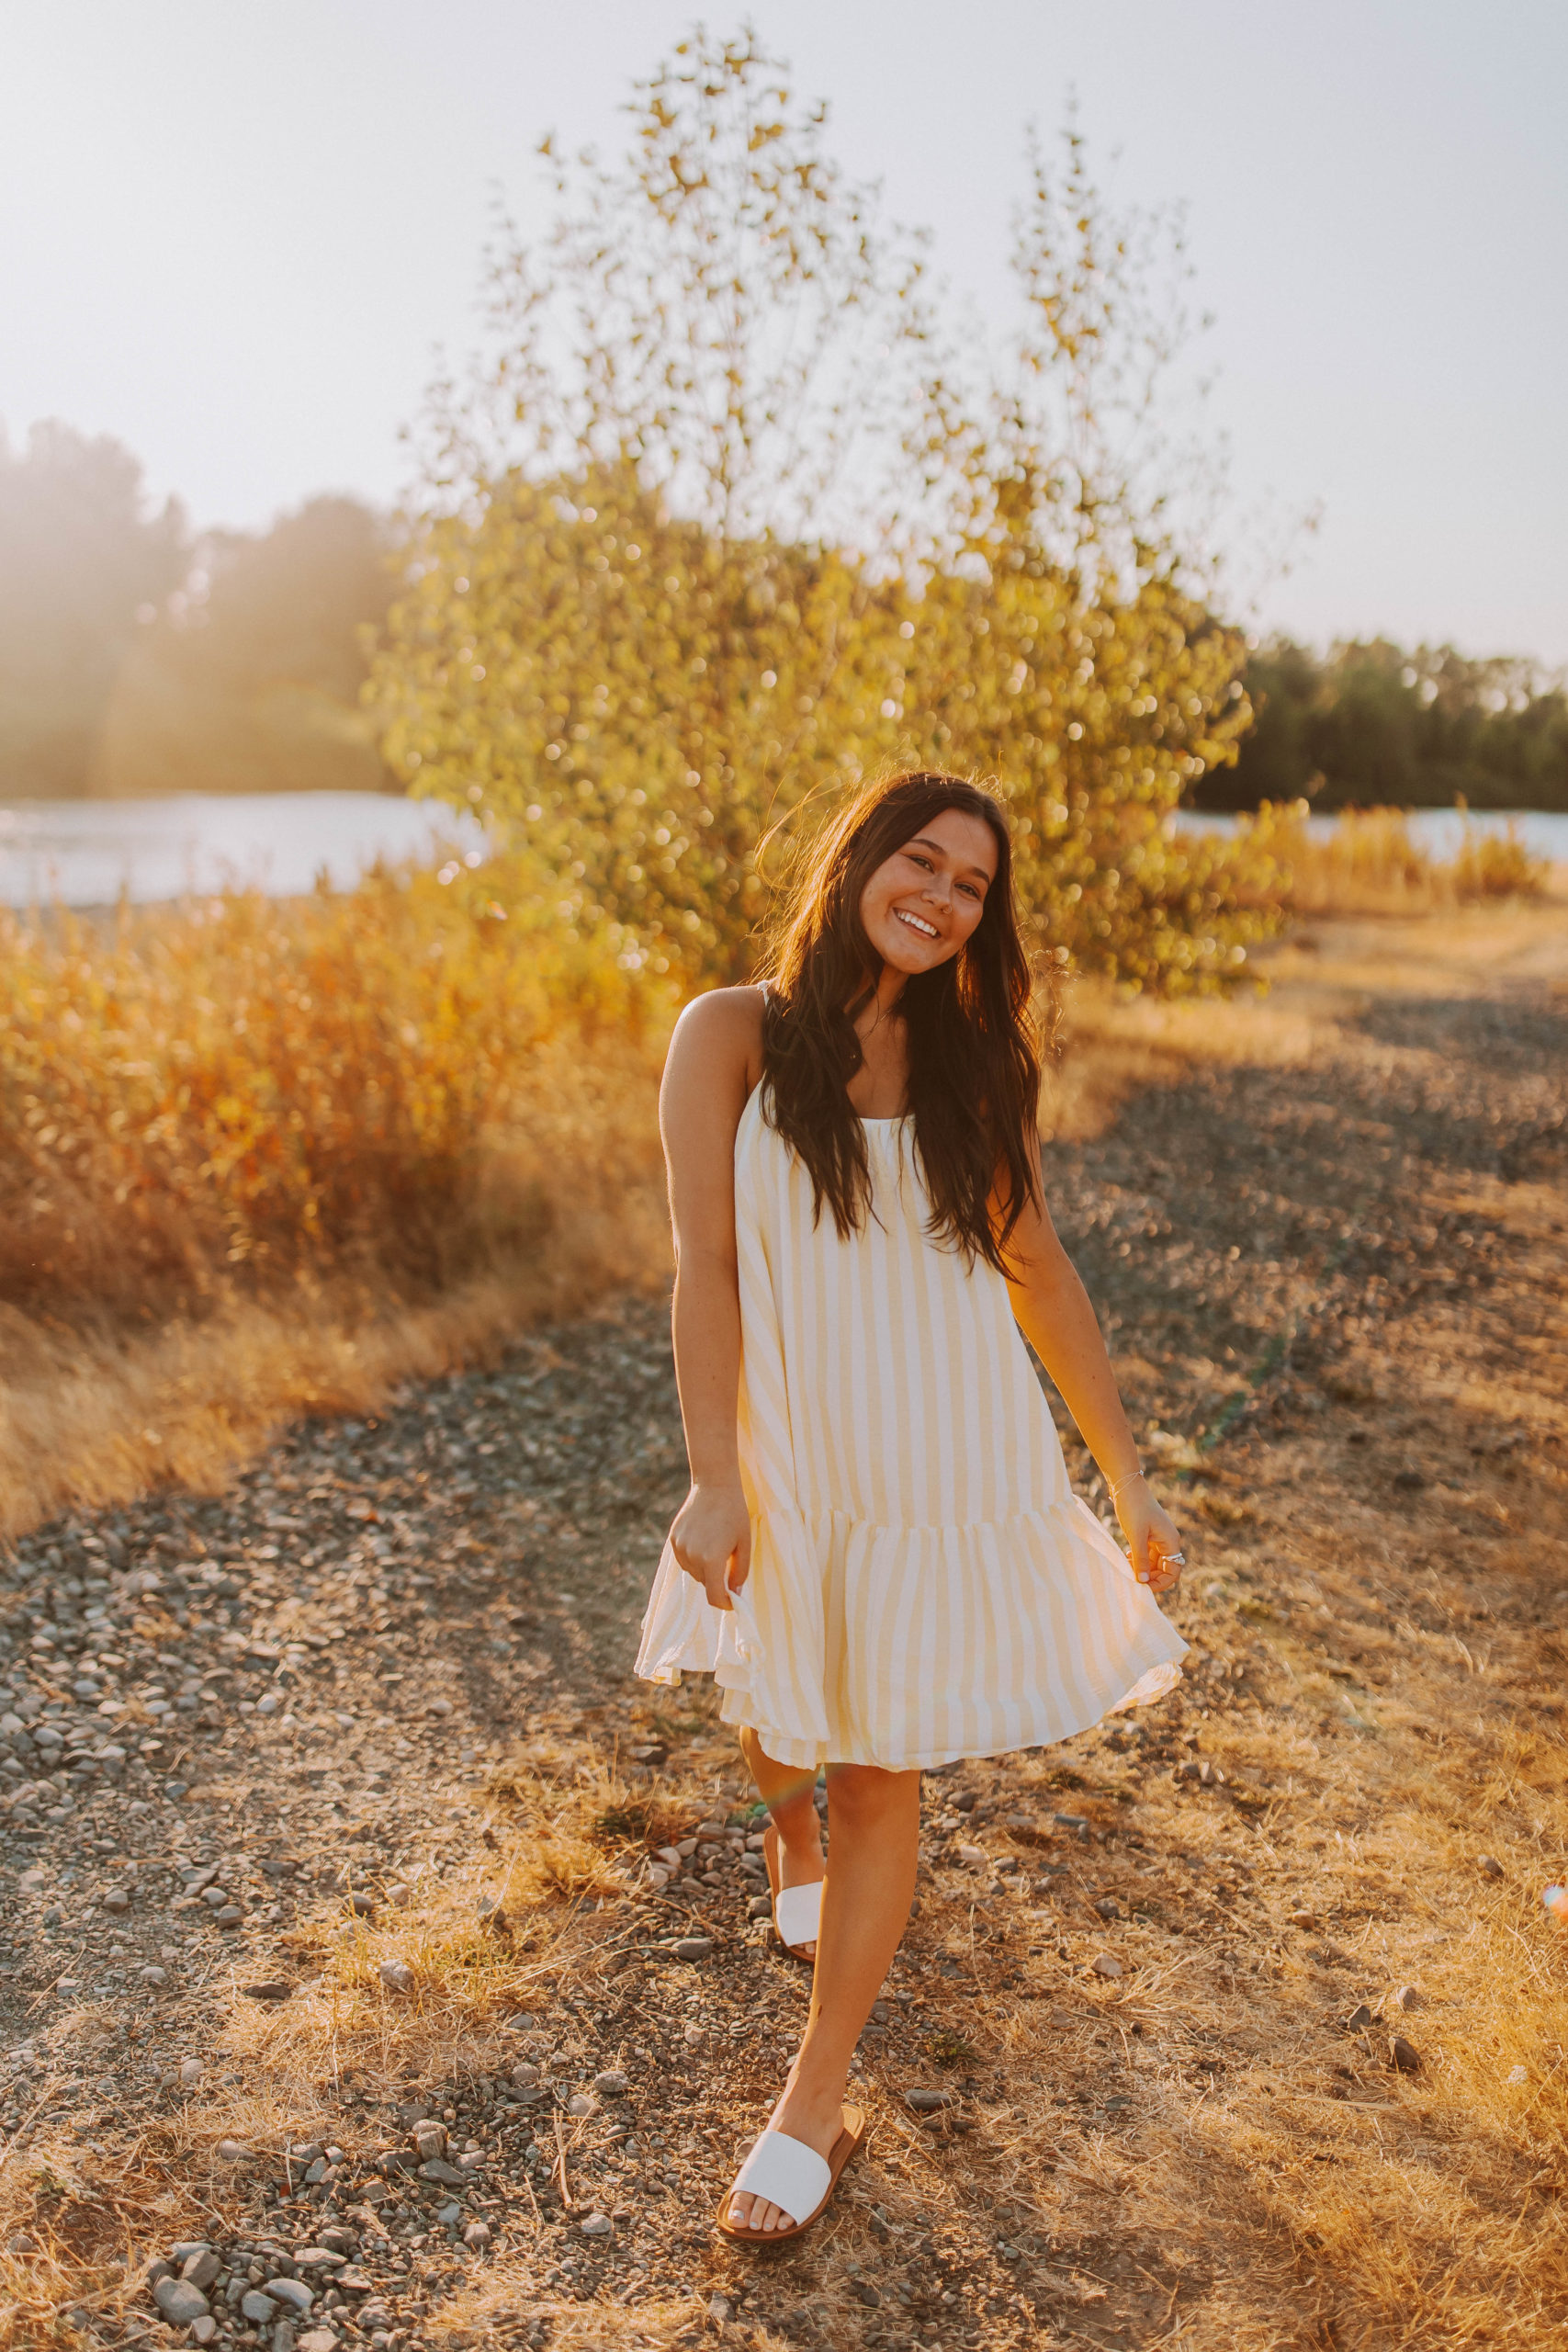 senior smiling with her sundress flowing in the wind during golden hour